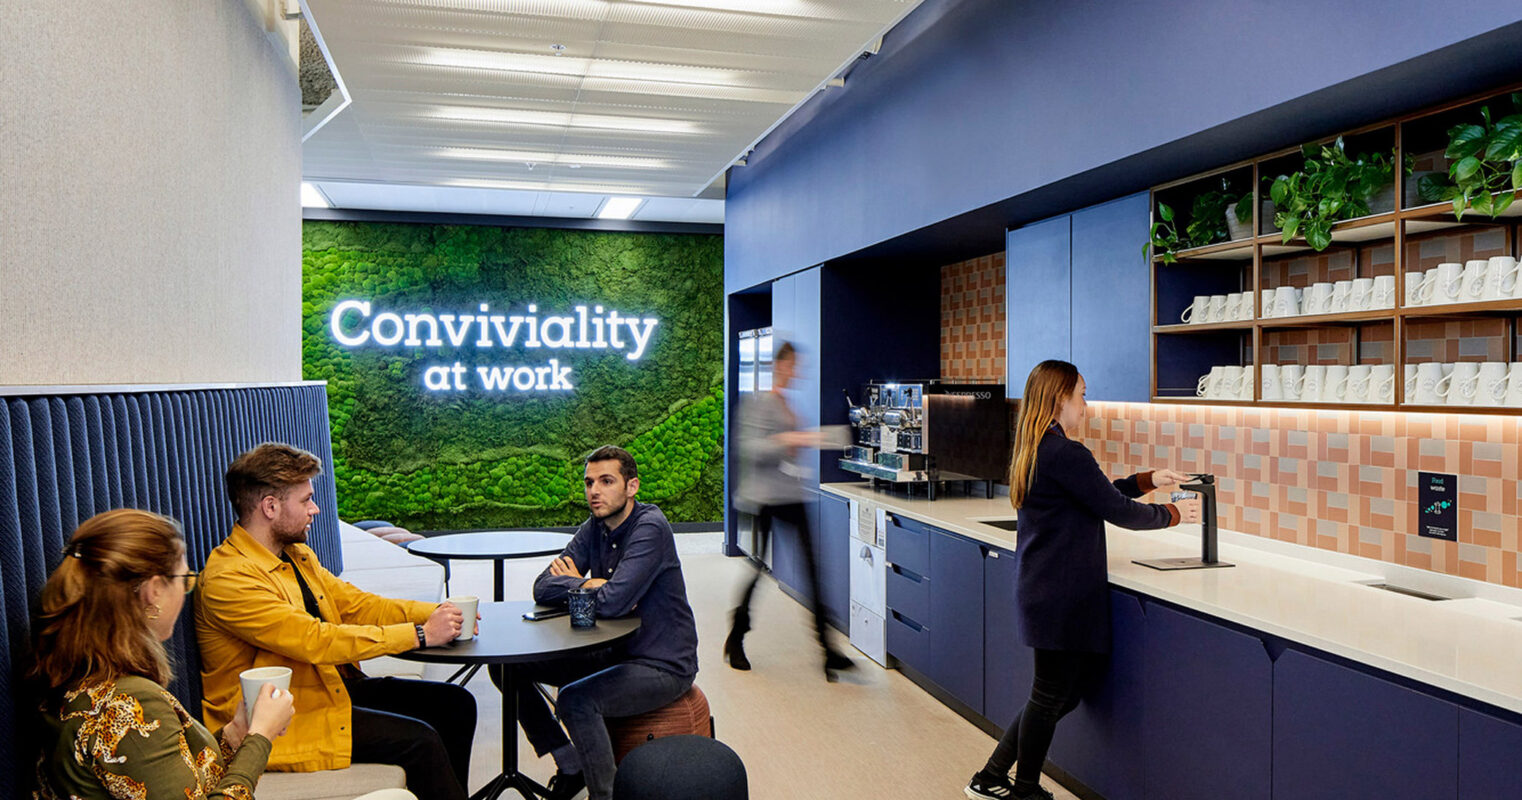 Modern office break room featuring a blue color scheme with integrated plant shelving and a prominent green living wall displaying the text "Conviviality at work". Employees engage casually around tables and the functional kitchenette area.